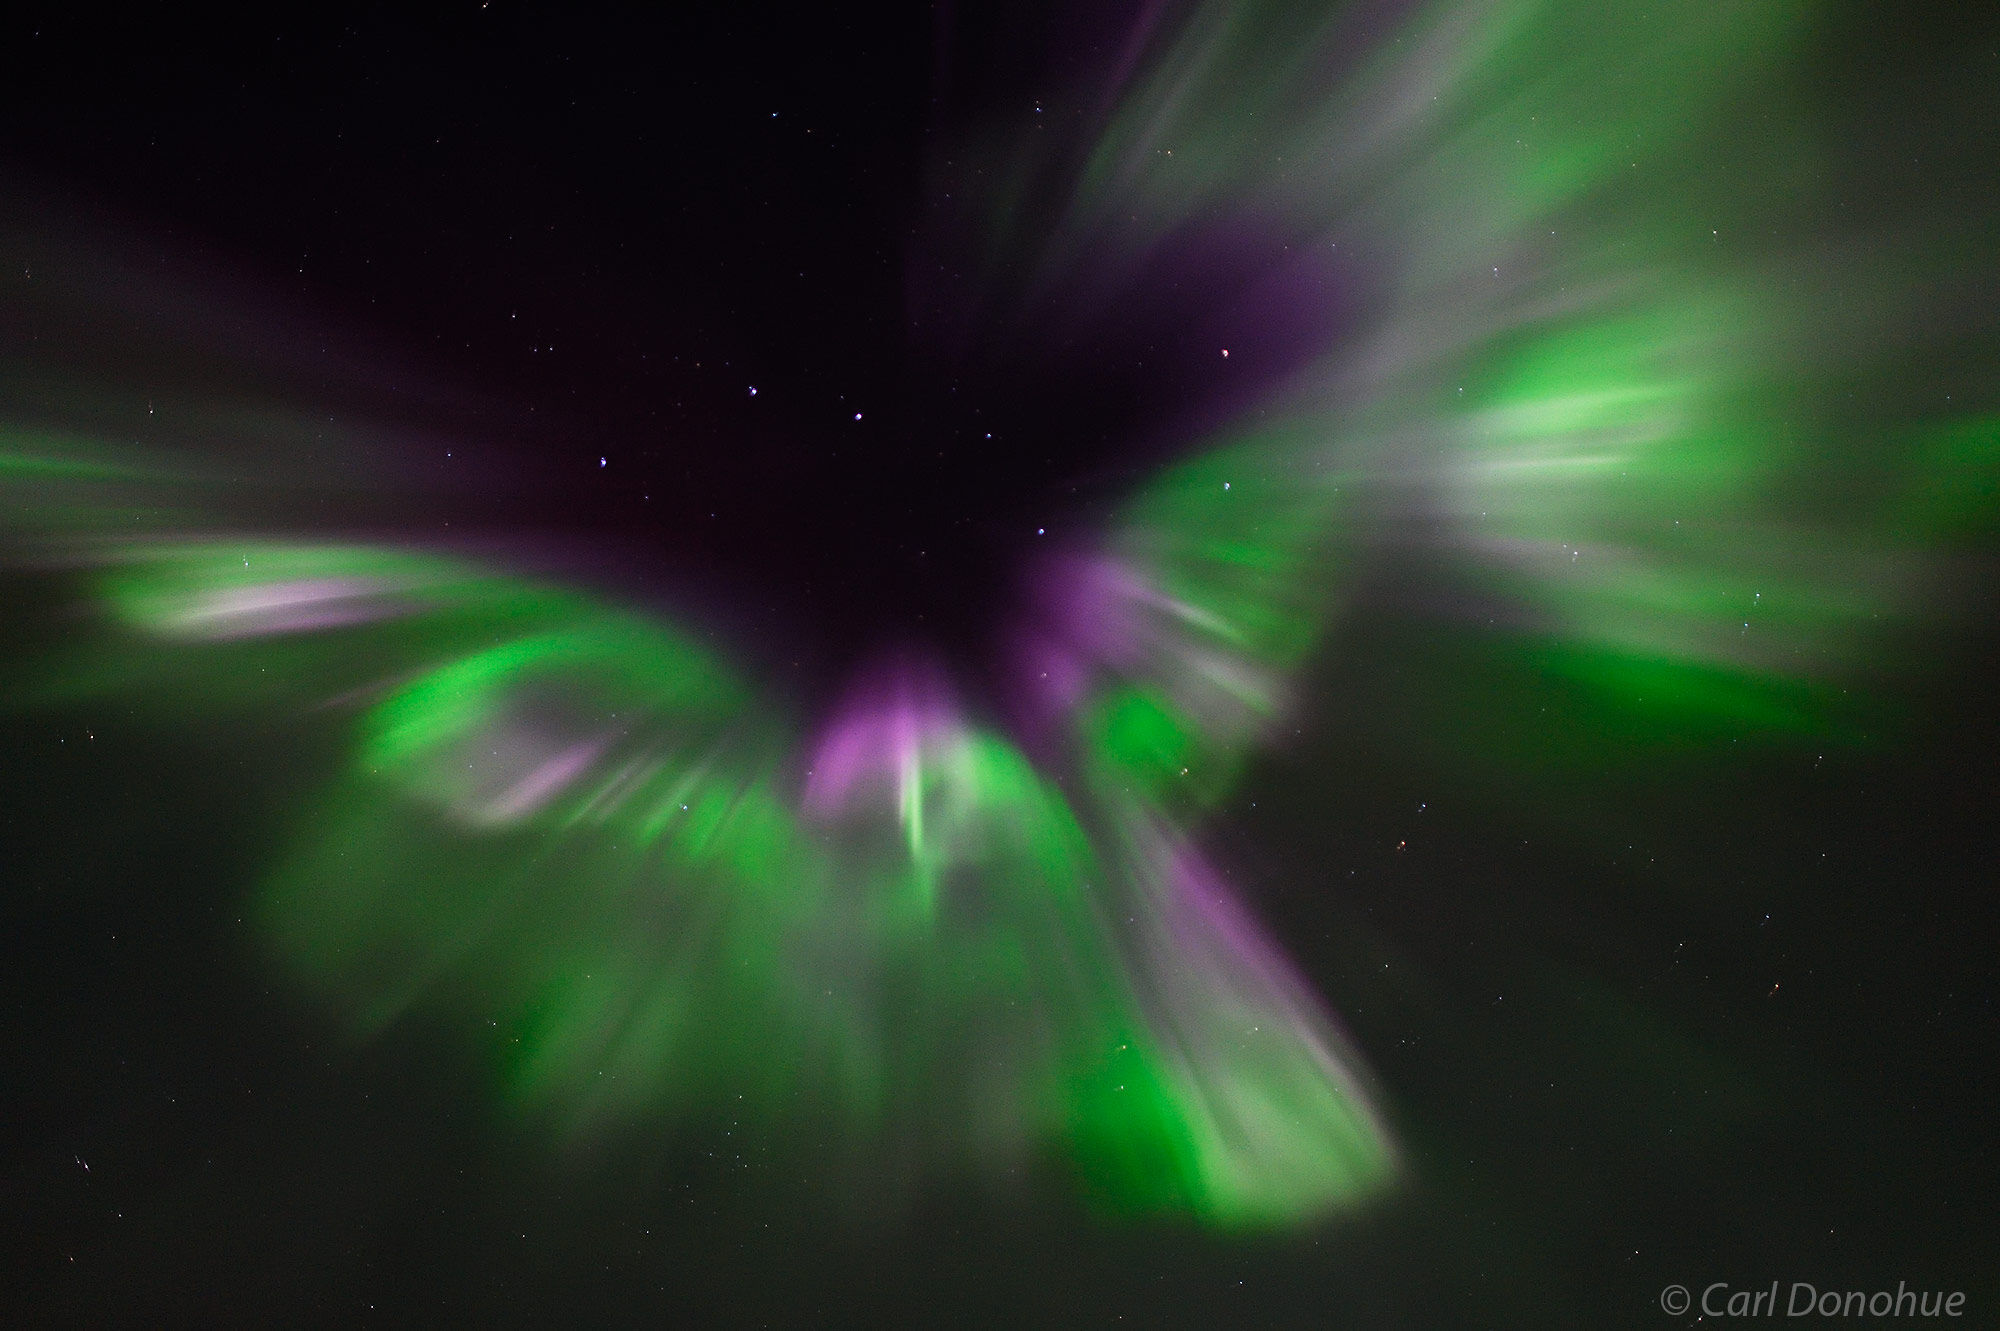 I see the Phoenix. The auroral borealis corona. Purple and green here, took my breath away as I stood transfixed and photographing...